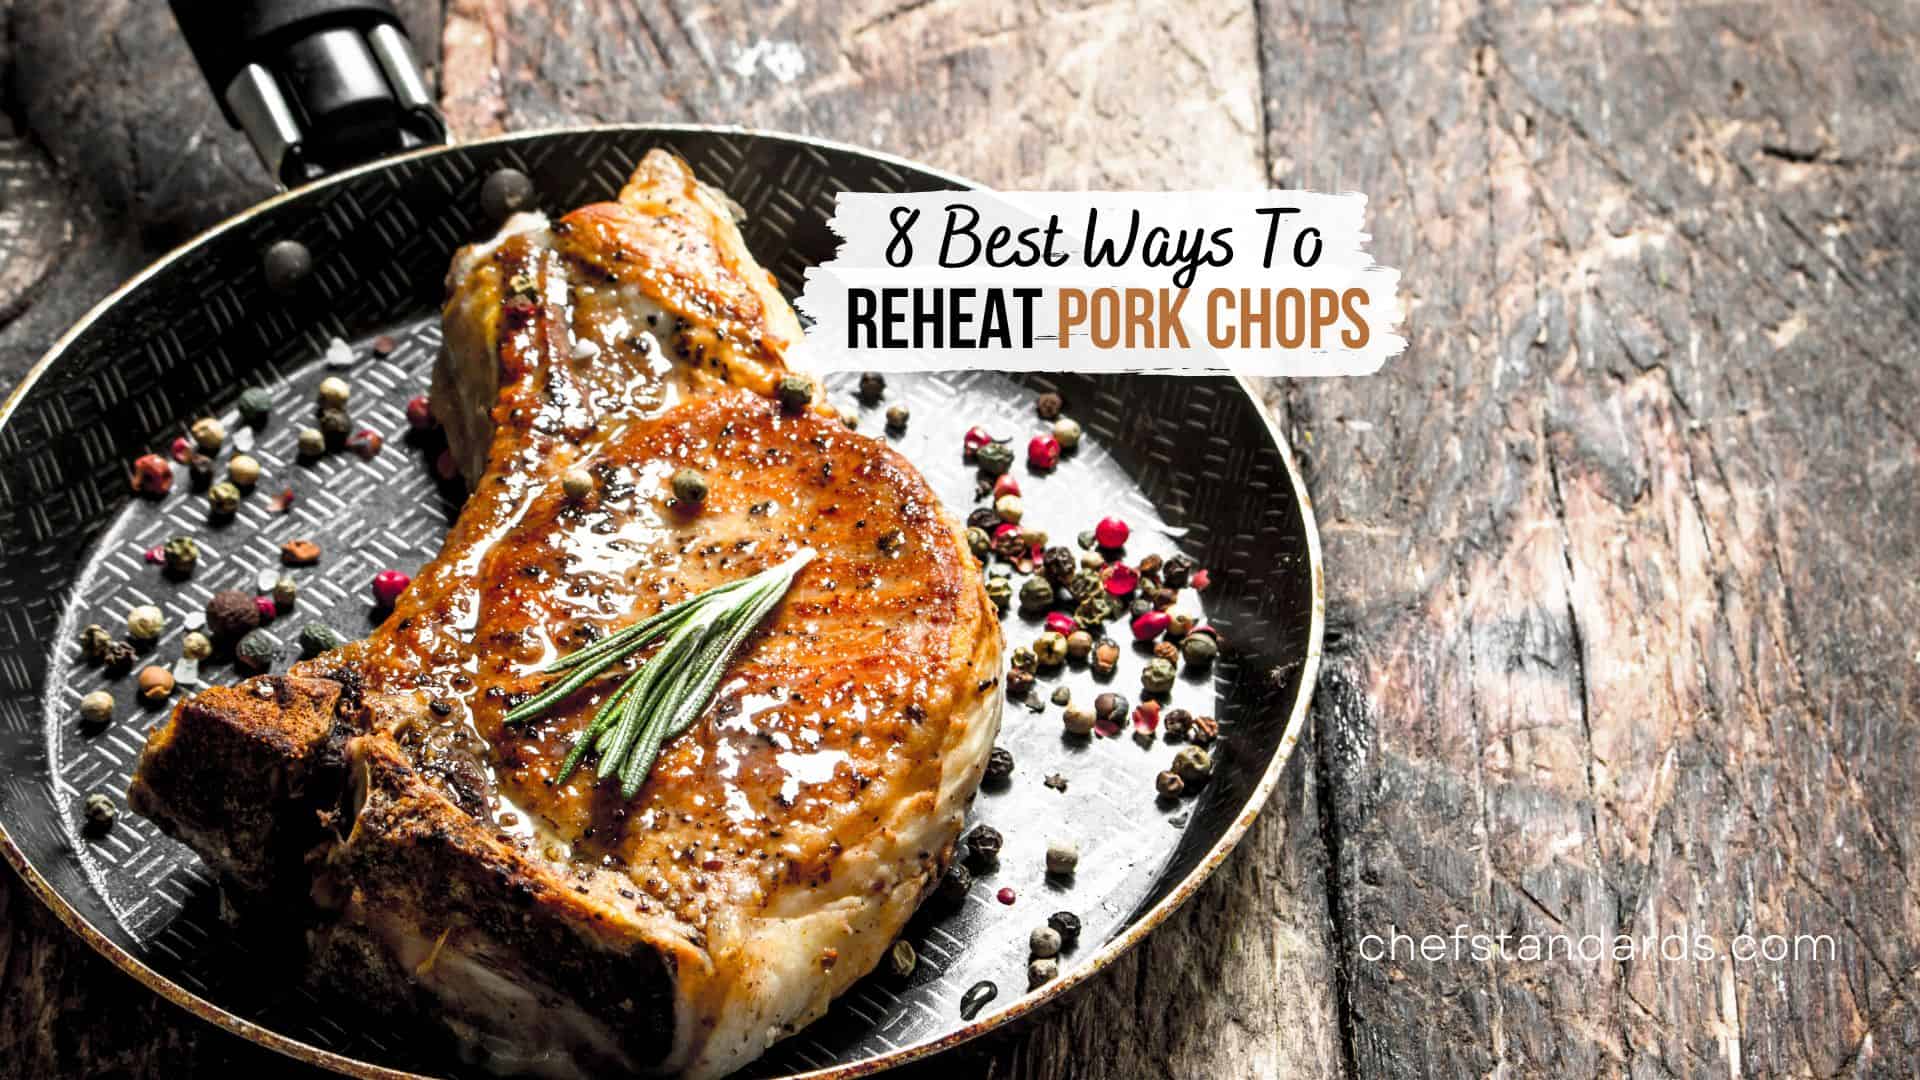 8 Best Ways To Reheat Pork Chops And 6 Common Mistakes To Avoid